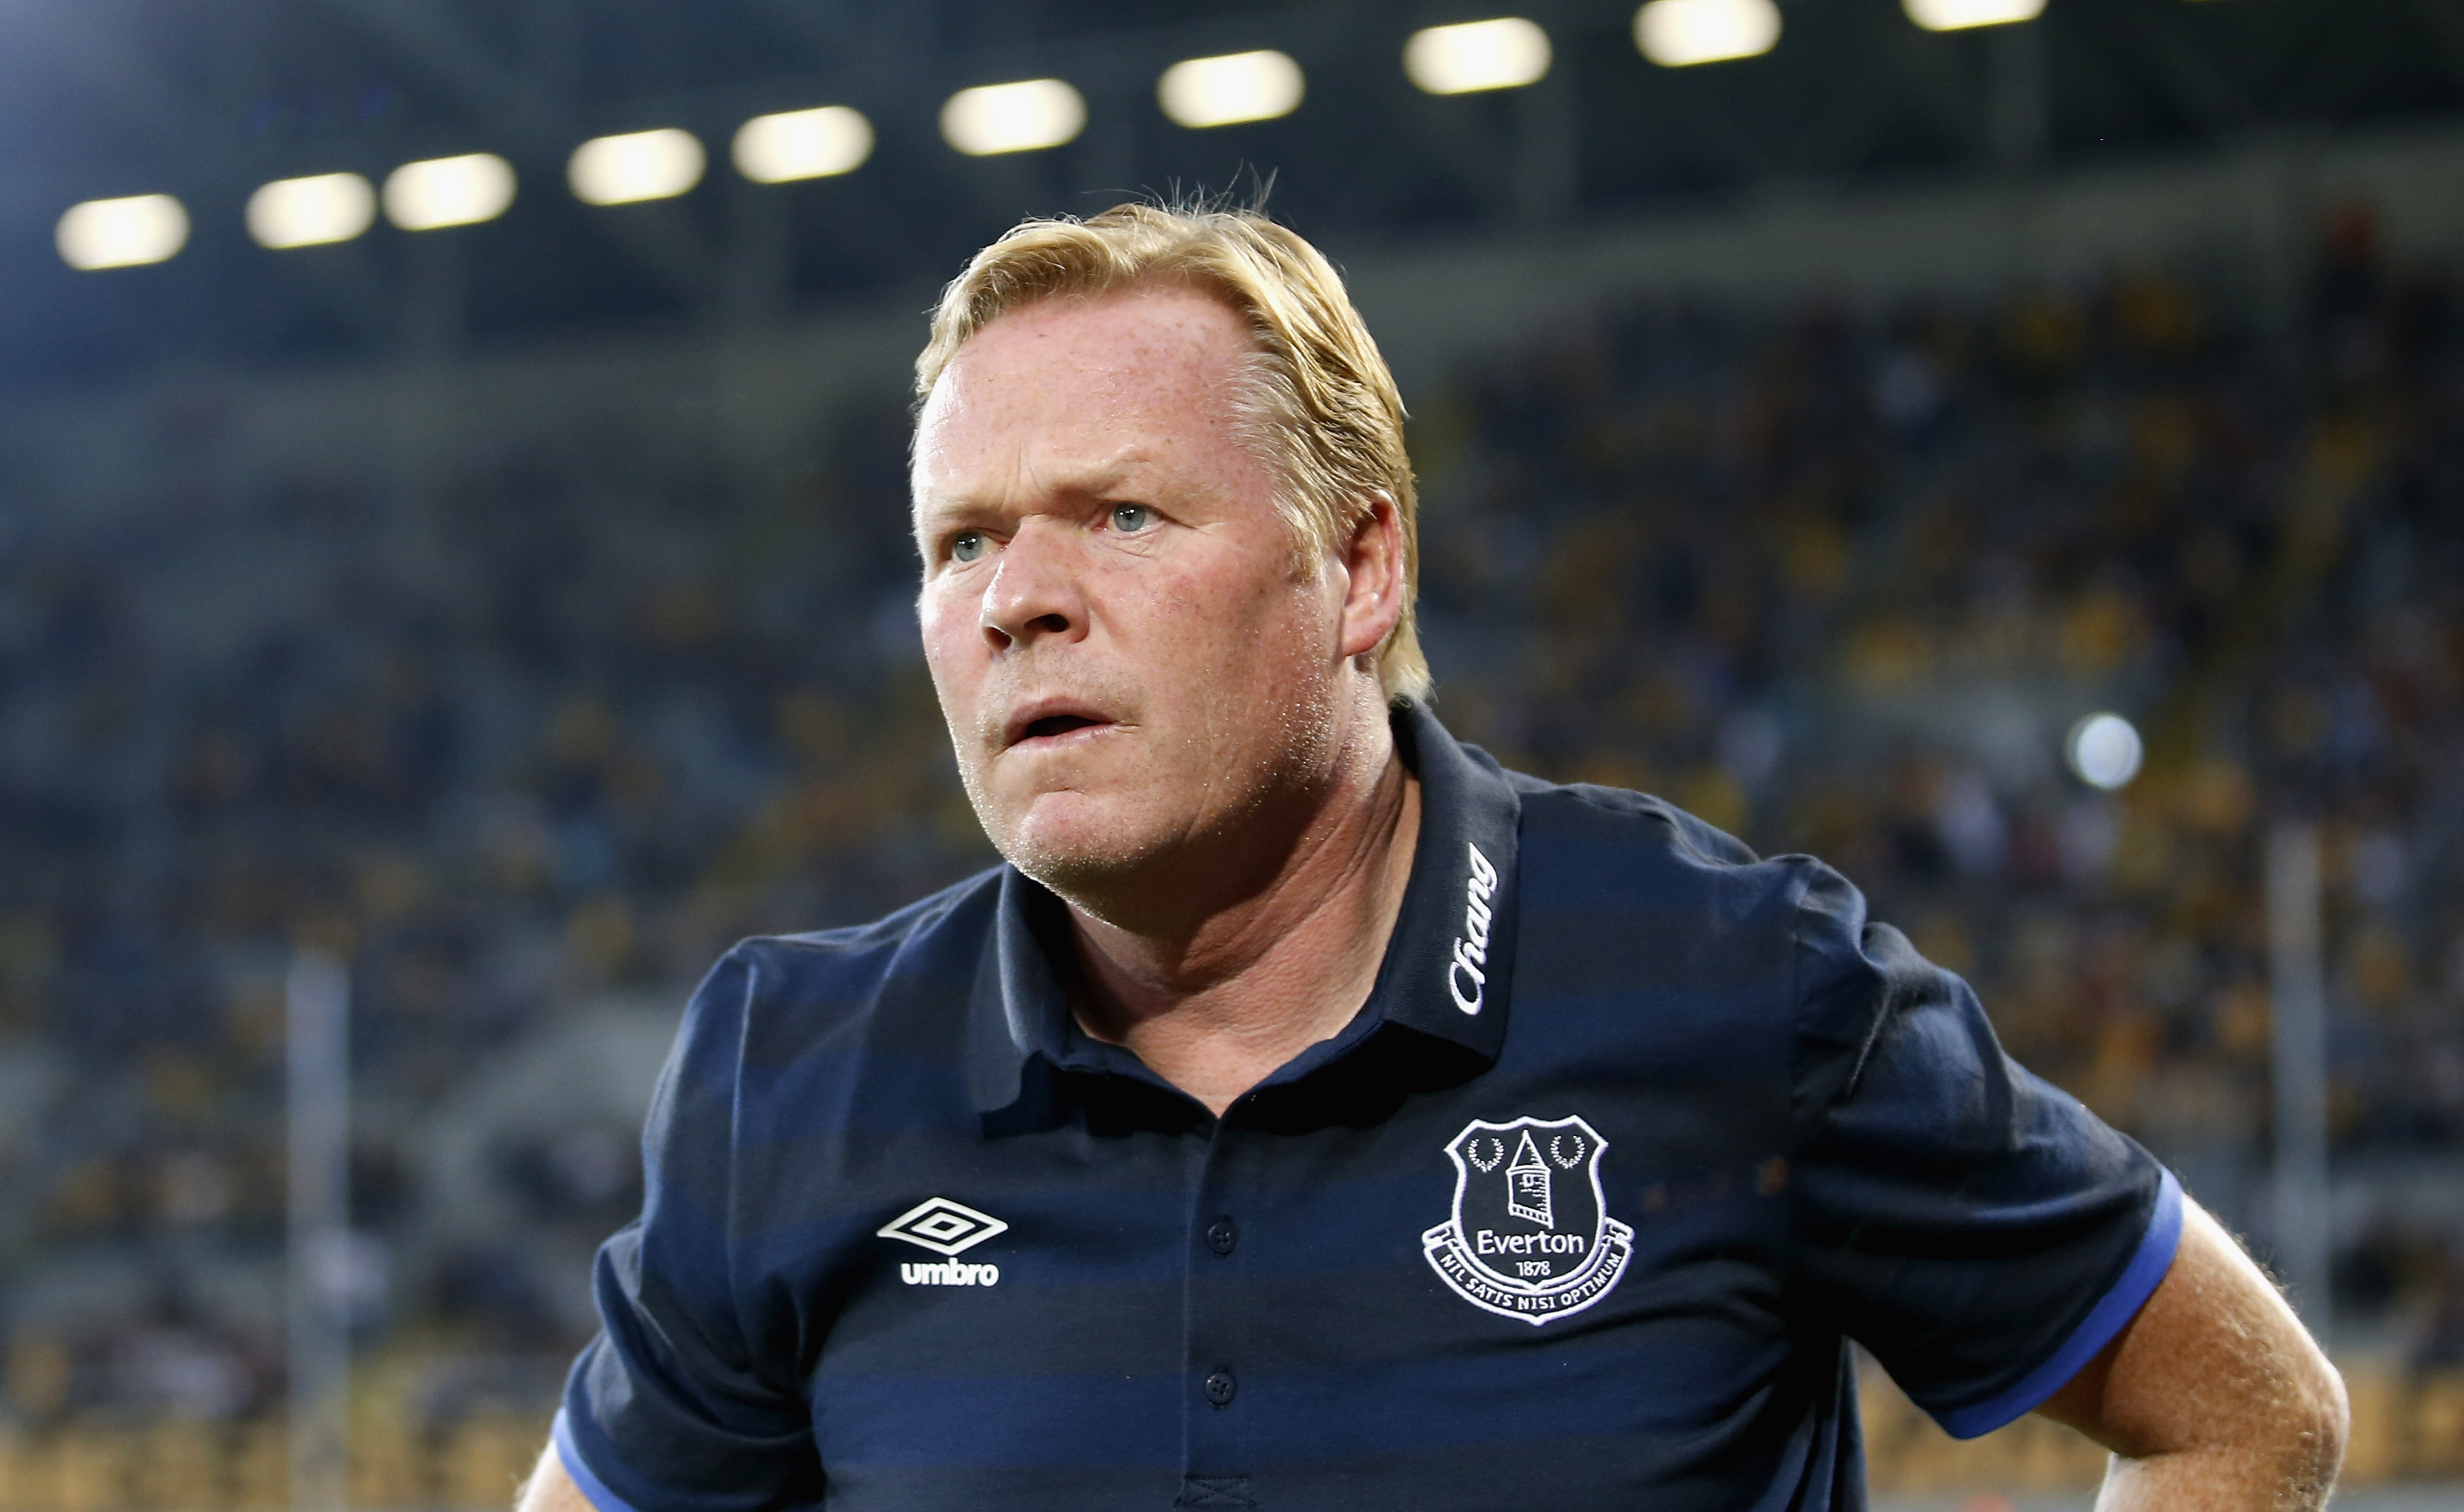 Koeman's appointment has been a show of ambition from Everton's board, having previously taken chances with less experienced managers. BORIS STREUBEL / Bongarts / Getty Images